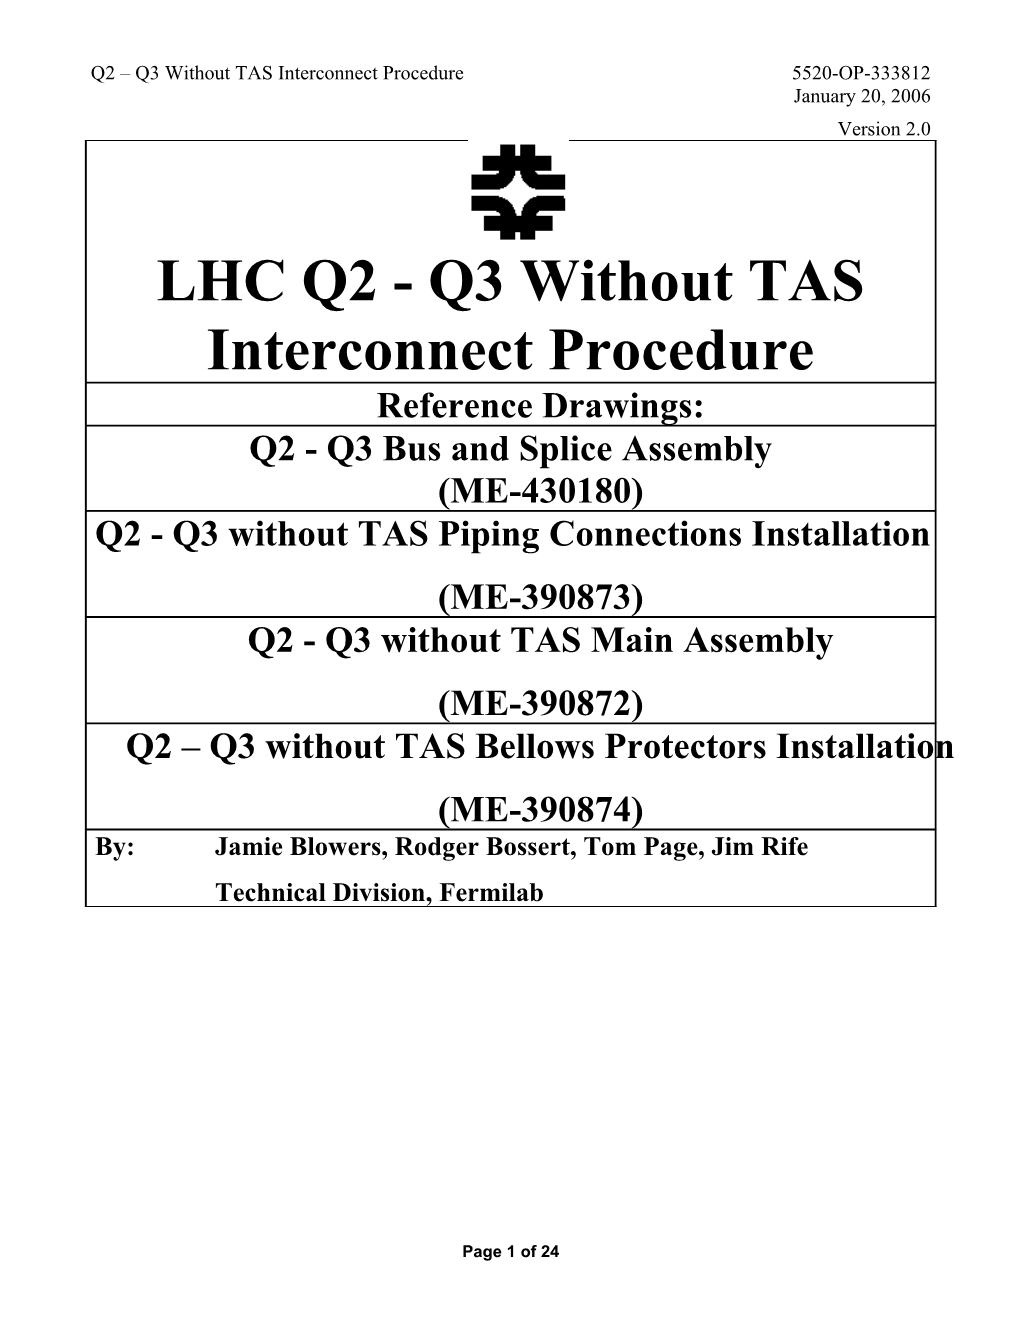 Interconnect Assembly Procedure Draft